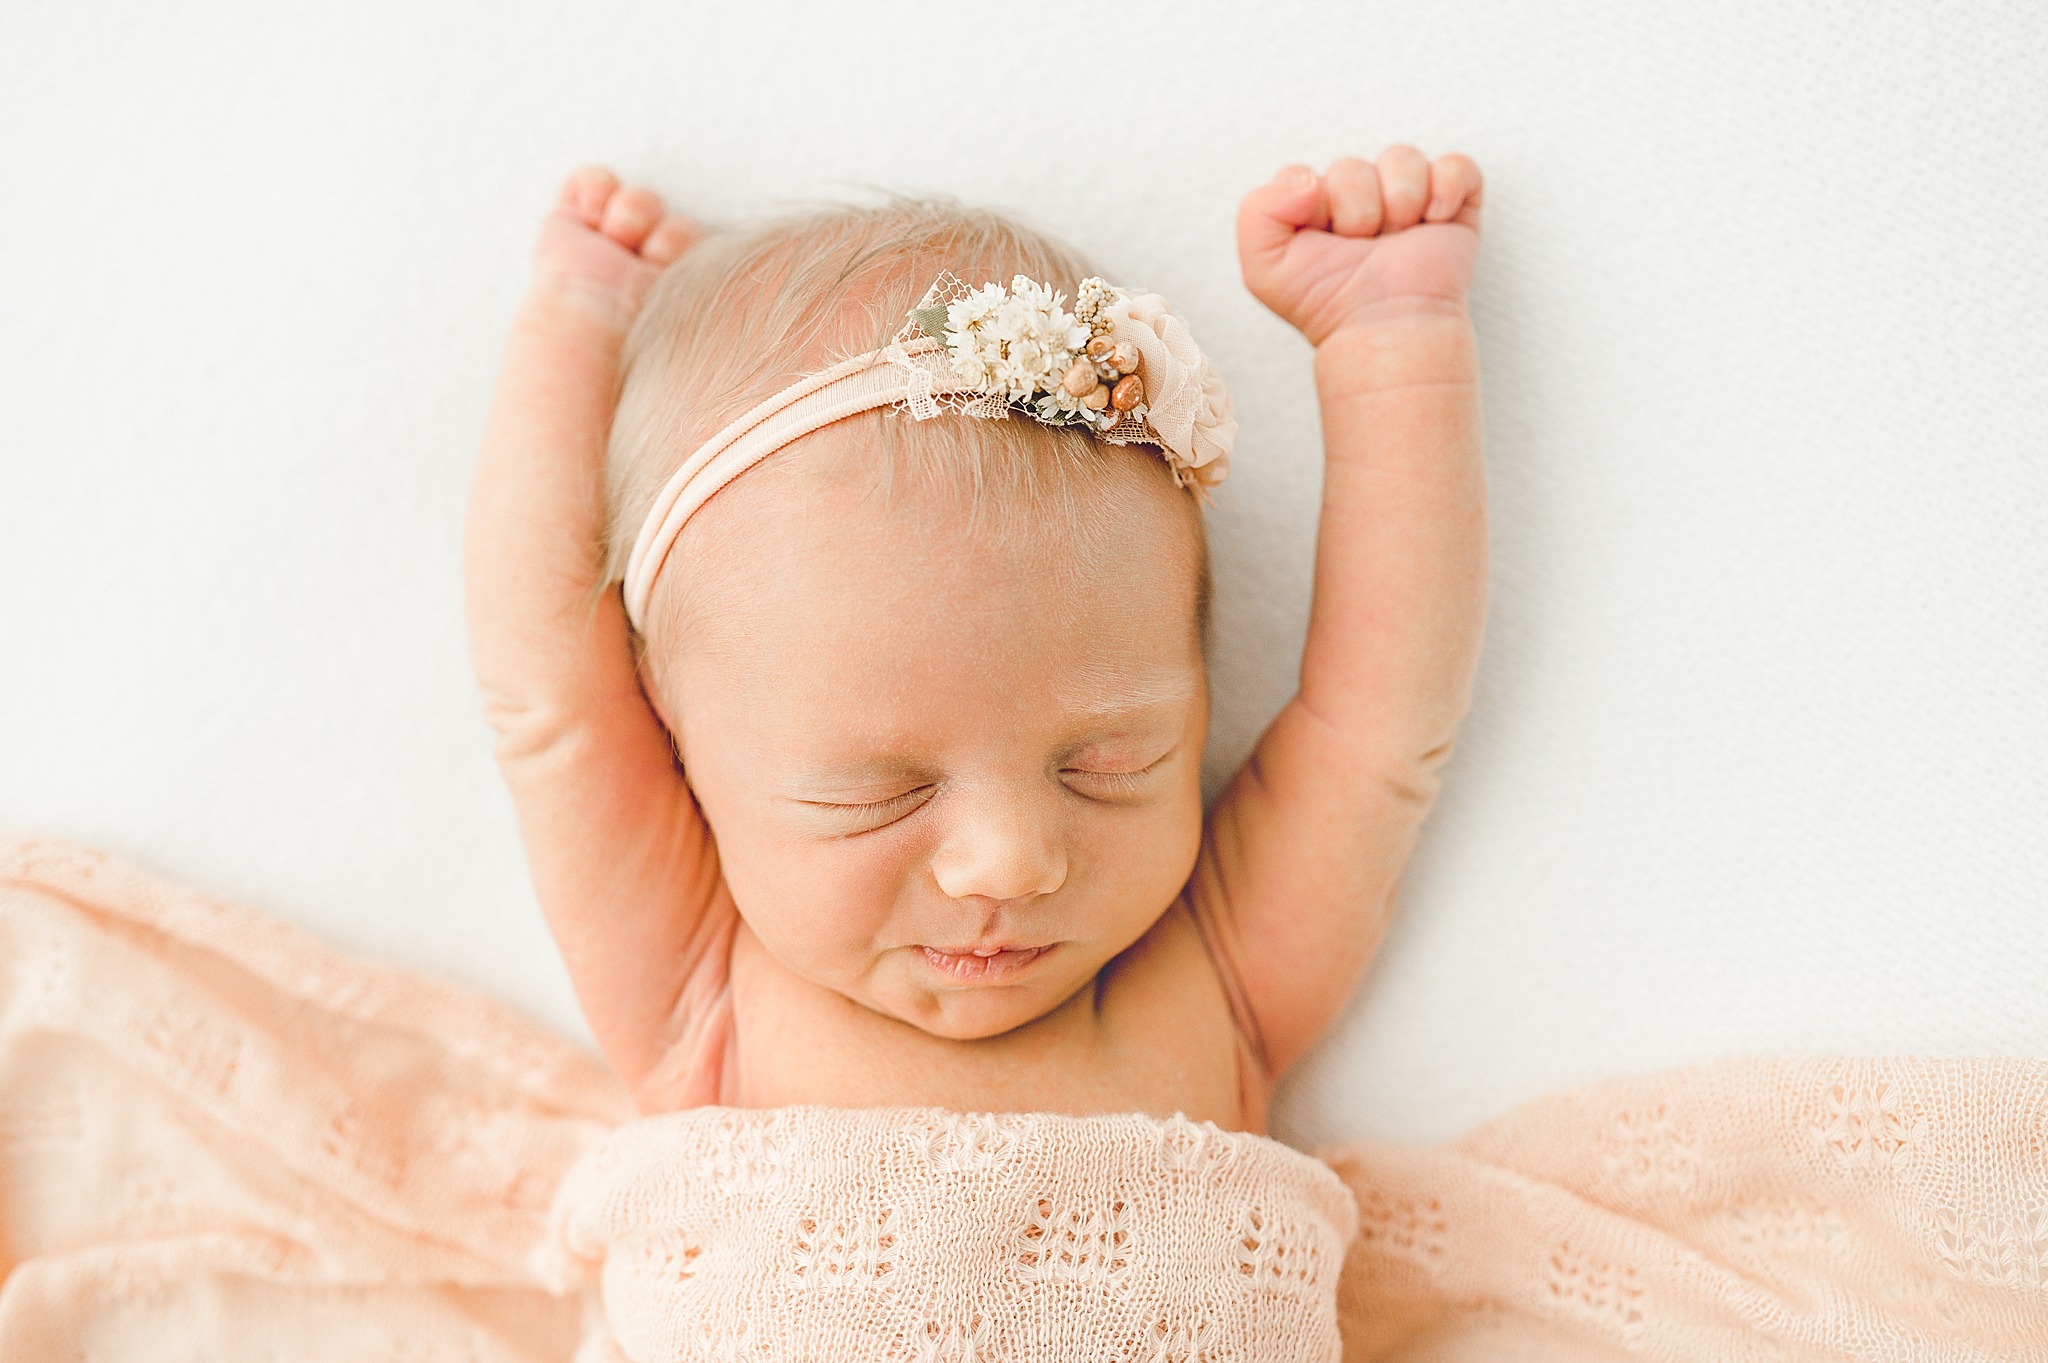 Natural Light Studio | Newborn Session with Baby Brinley